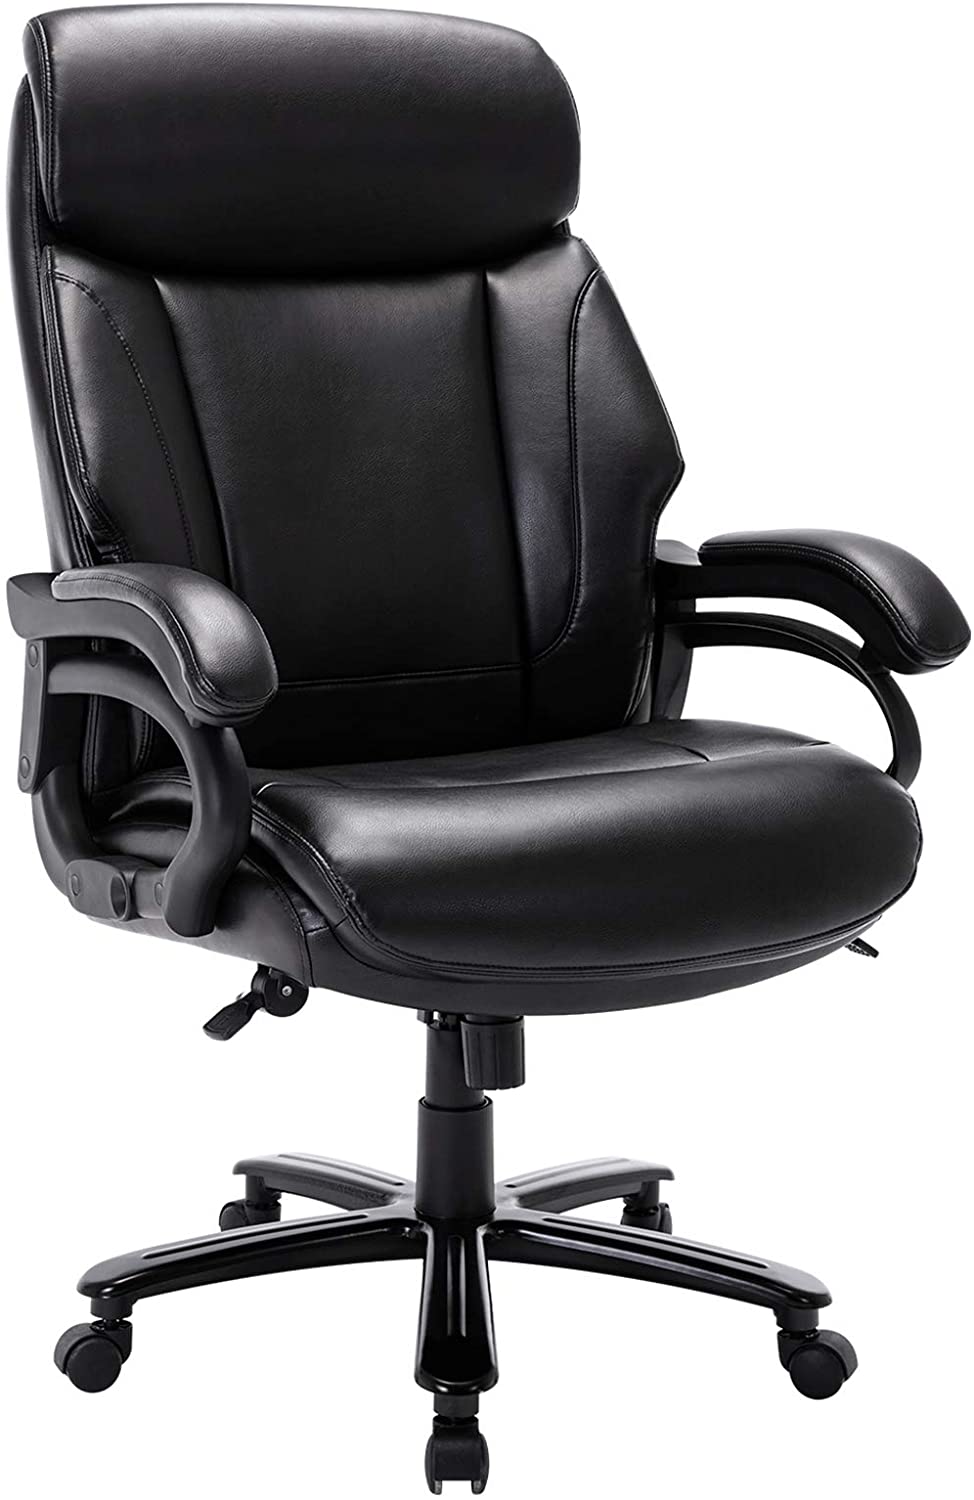 Qwork - best office chairs for big guys